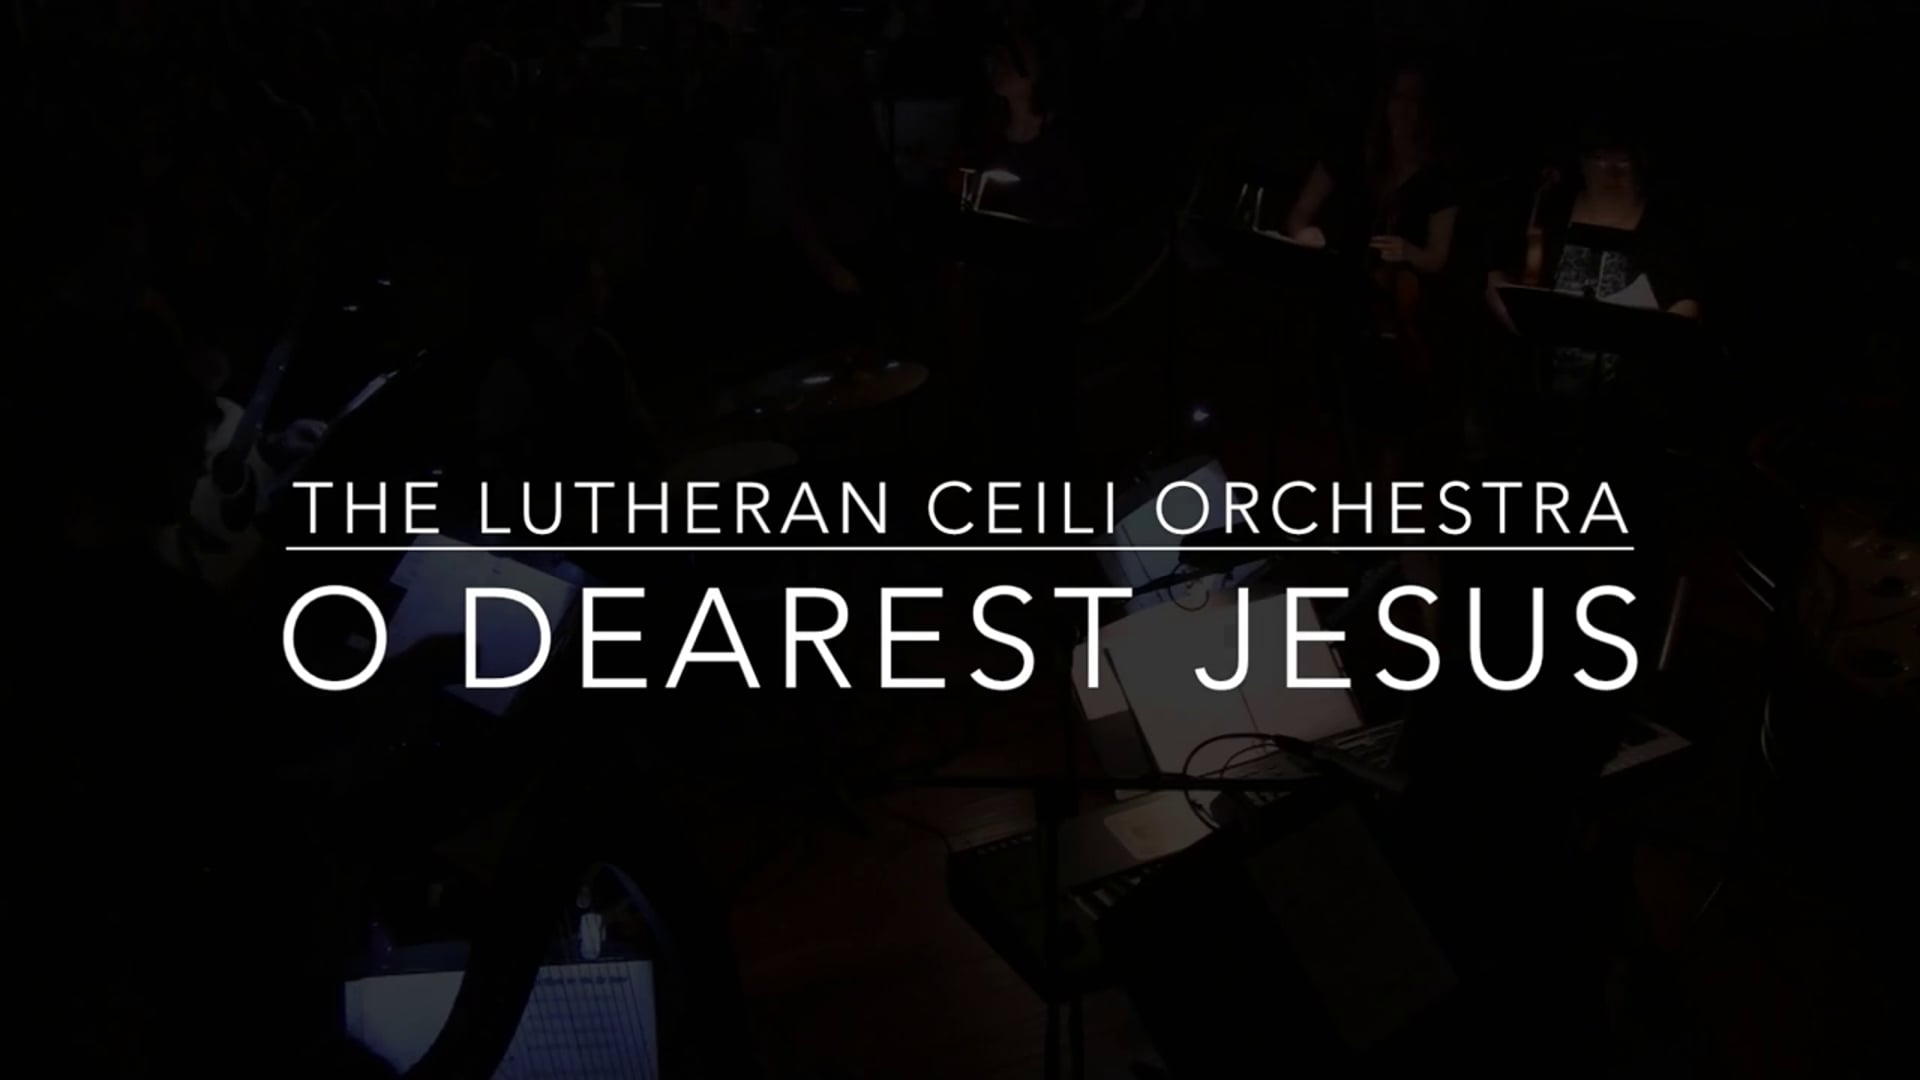 "O Dearest Jesus" by The Lutheran Ceili Orchestra